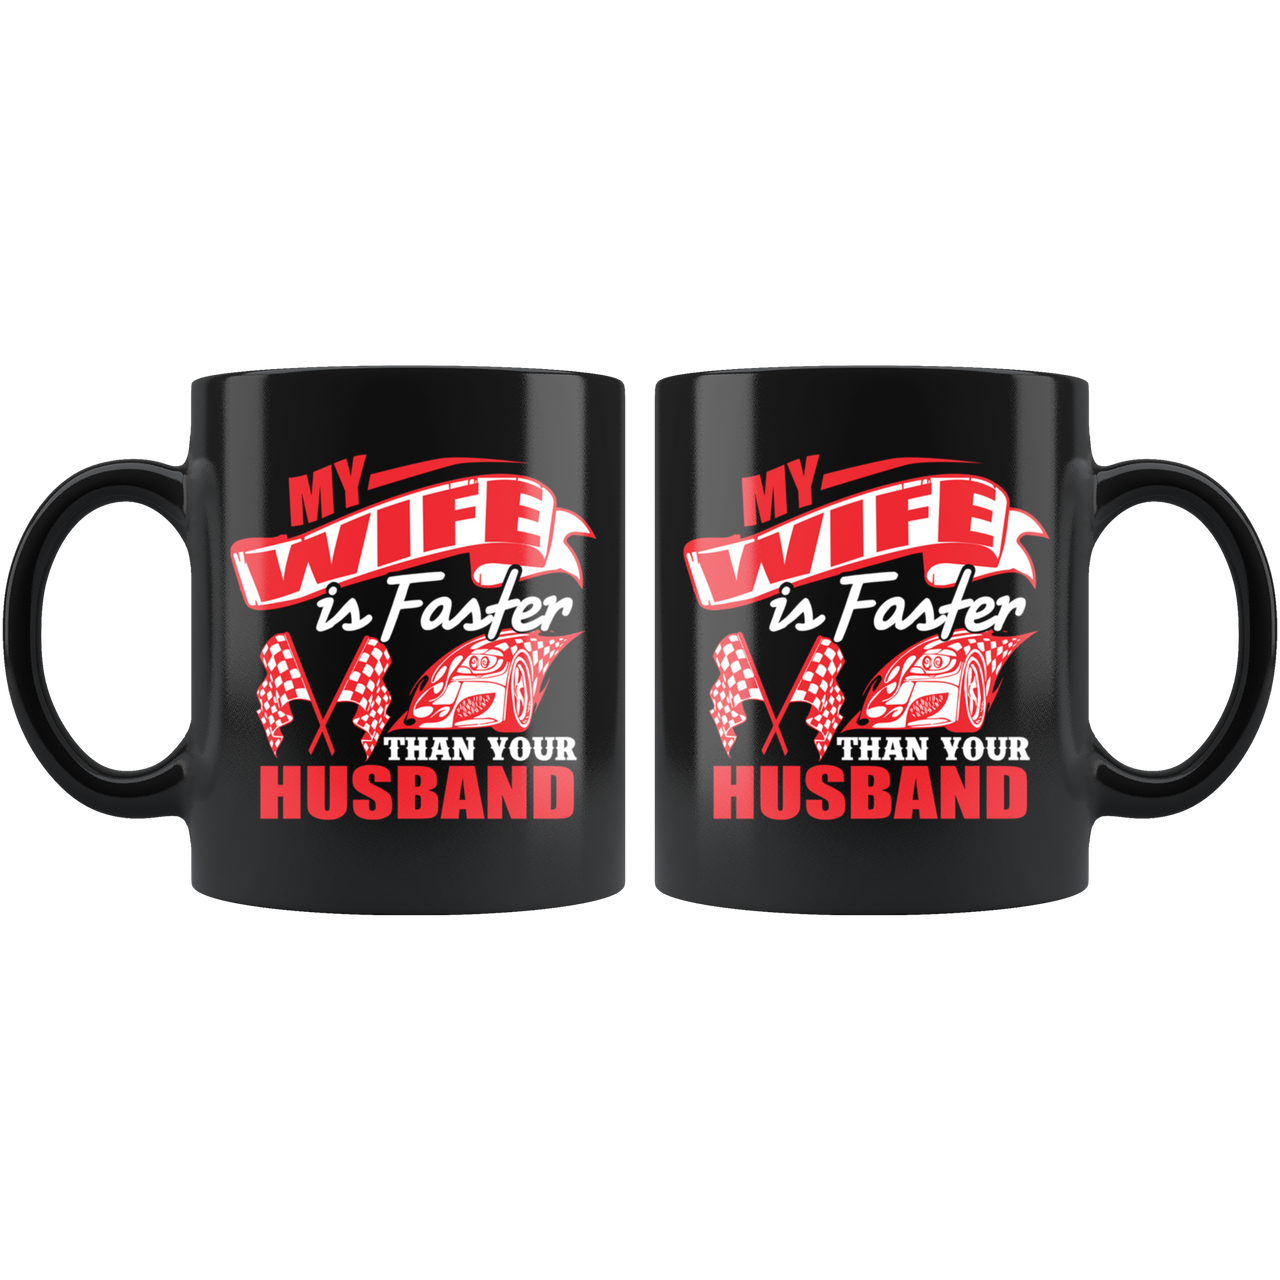 My Wife Is Faster Than Your Husband Mug!